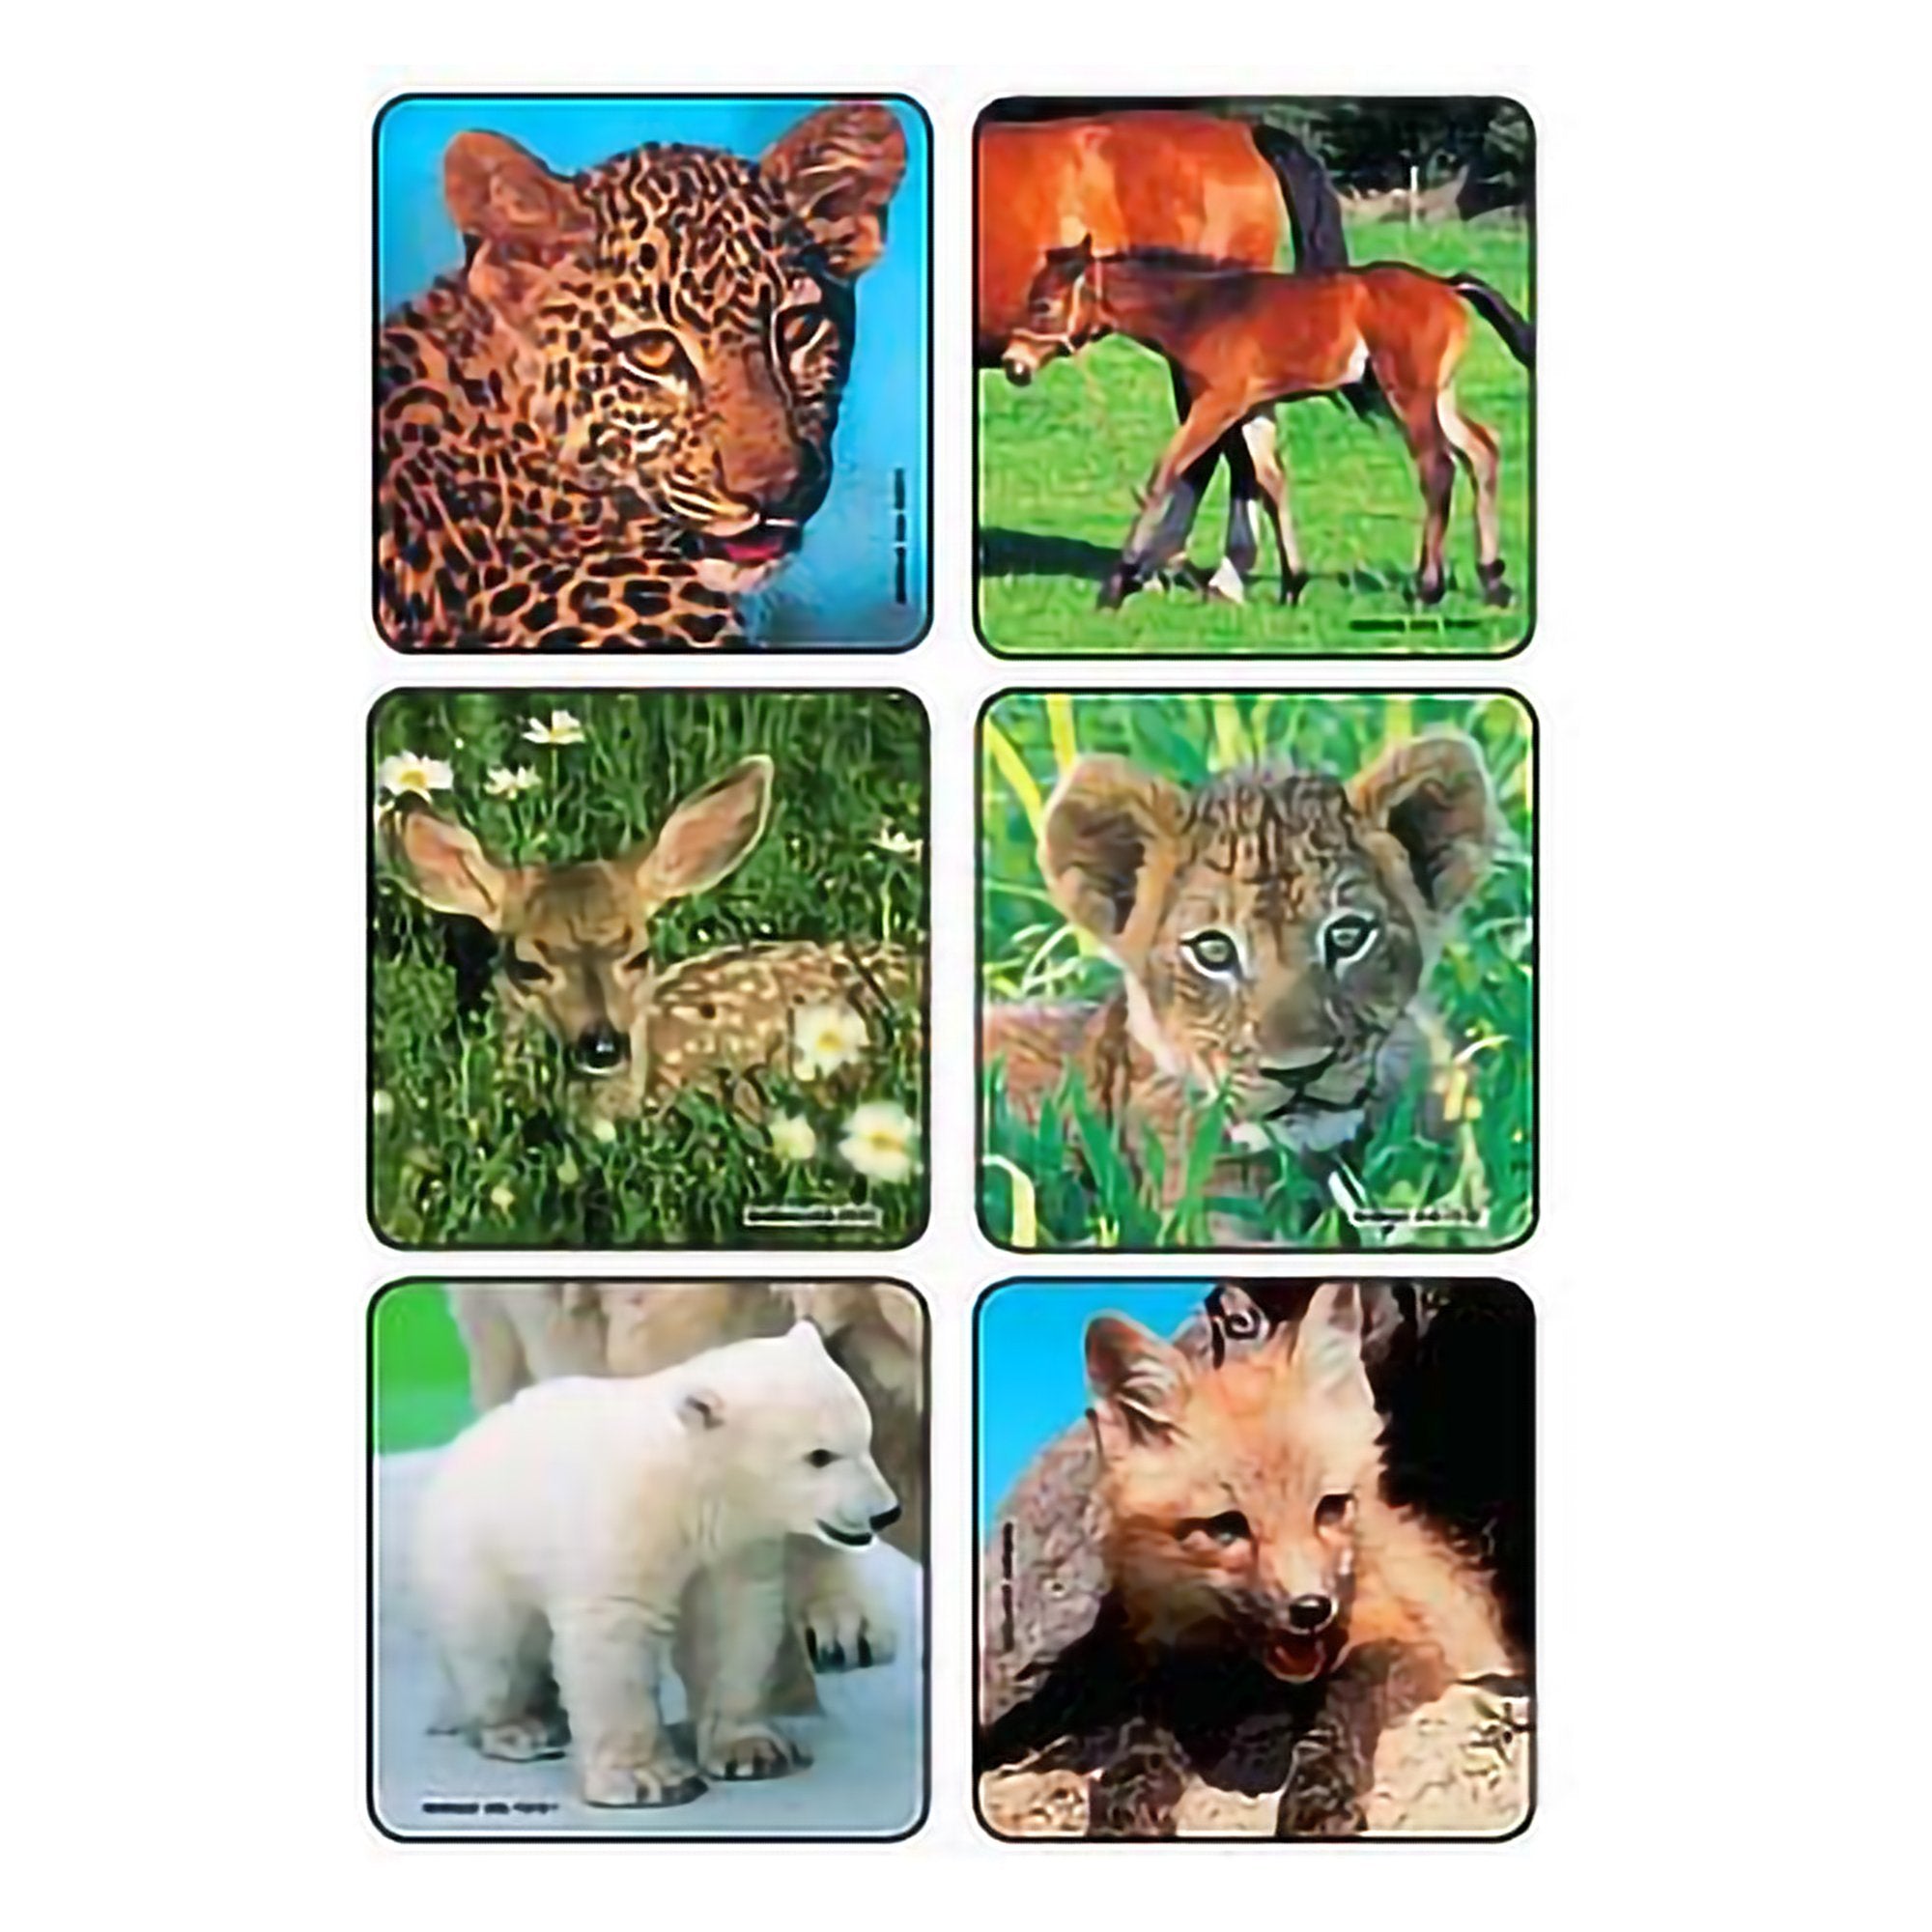 Kids Love Stickers® 90 per Pack Baby Animal Photos , Assorted Sticker 2-1/2 Inch